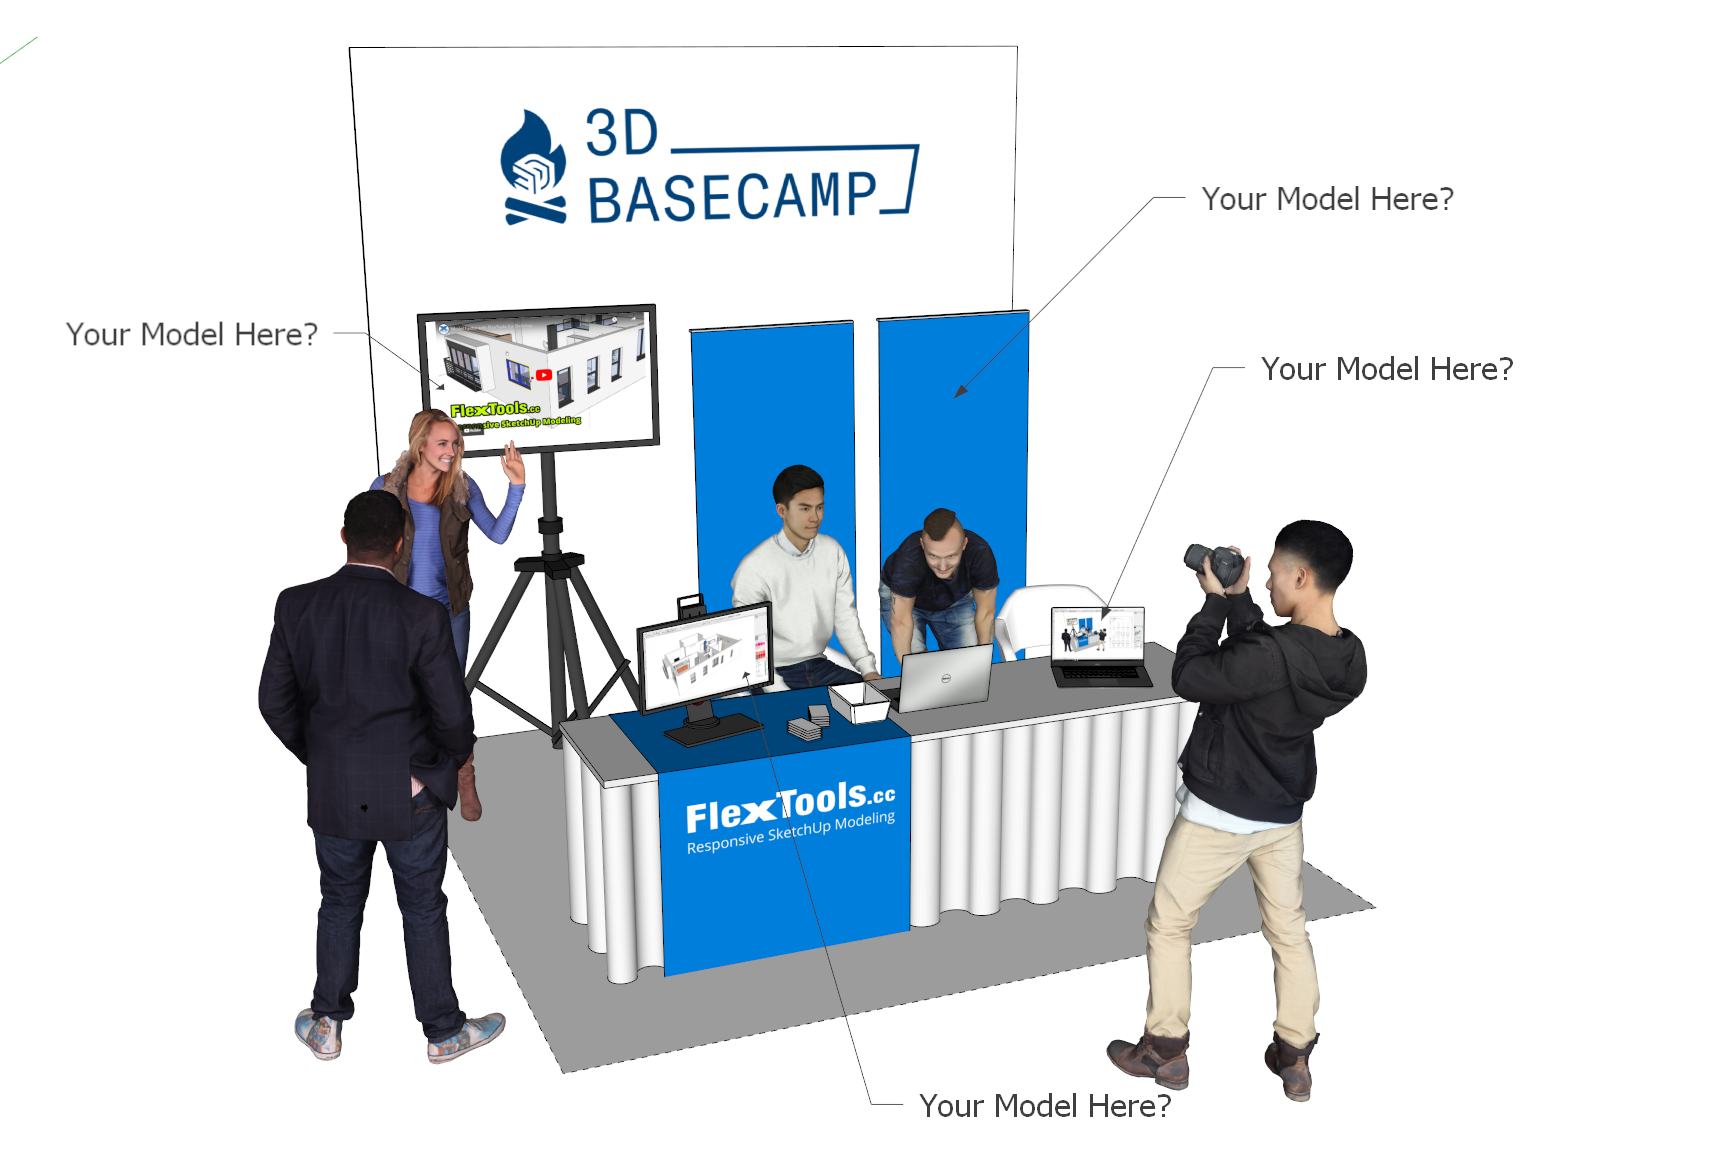 Call to all flextools users your model wanted for 3D Basecamp 2022